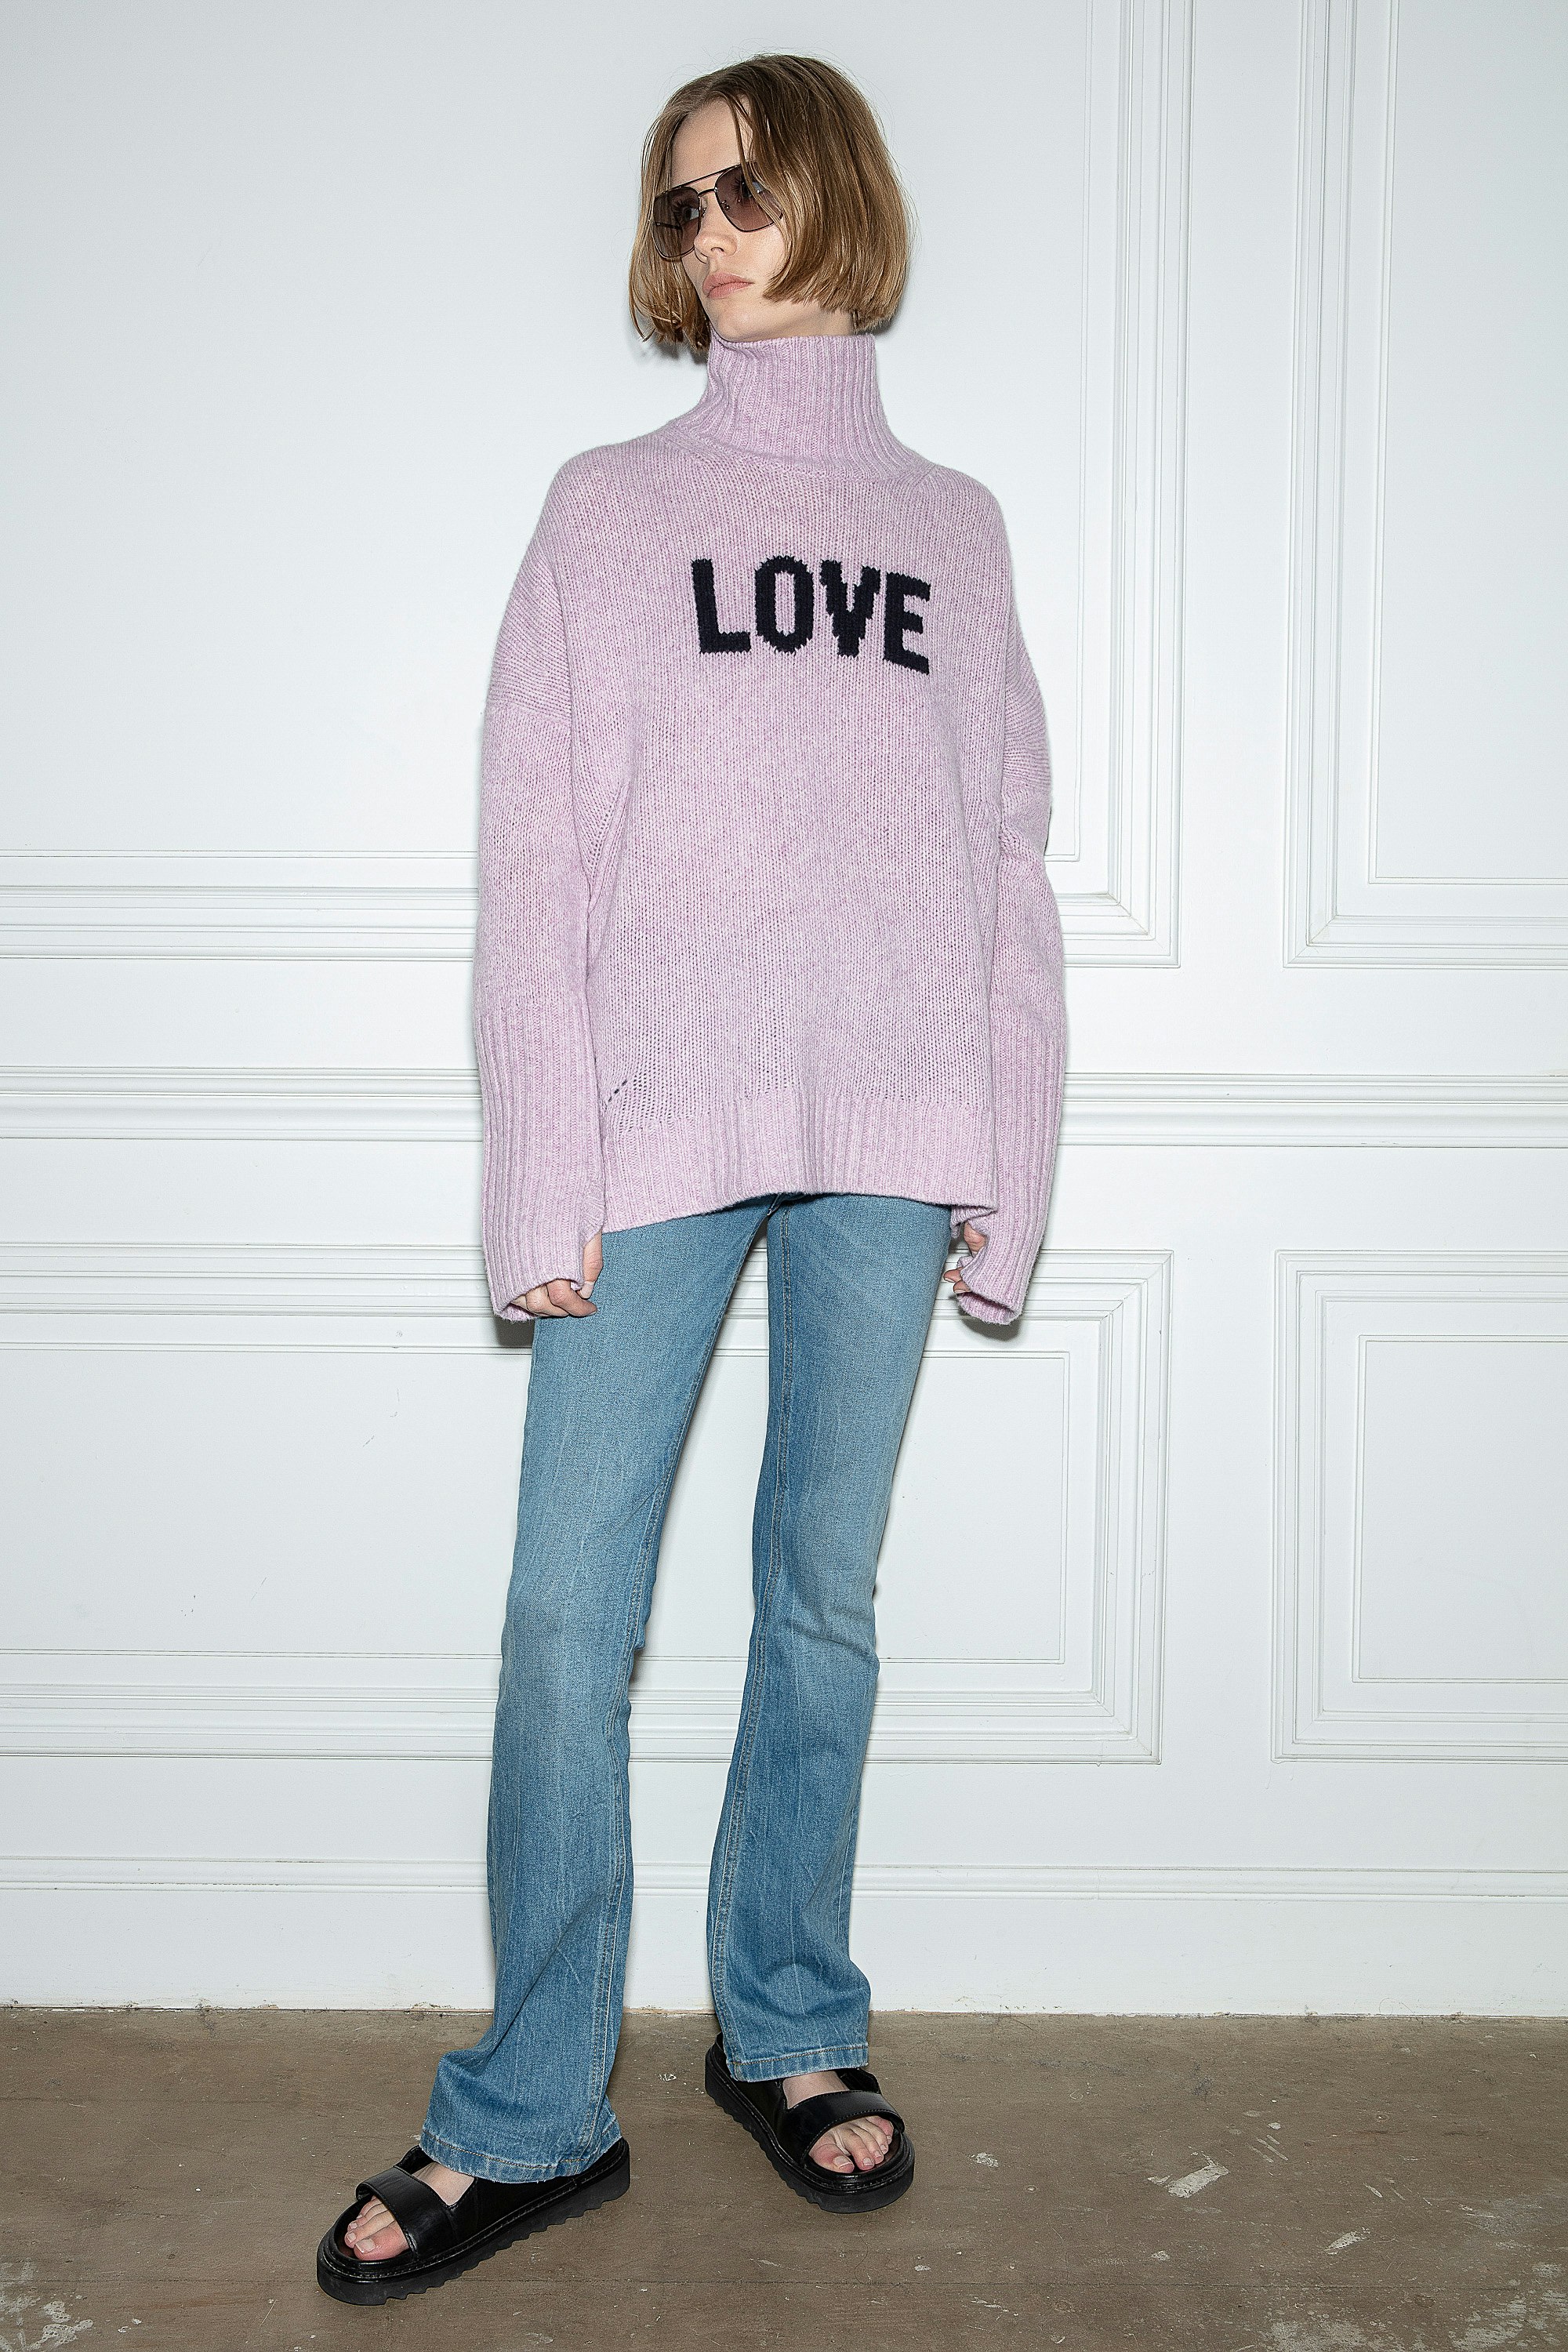 Alma Love Jumper Women’s light pink merino knit jumper with contrasting “Love” mantra and high neck